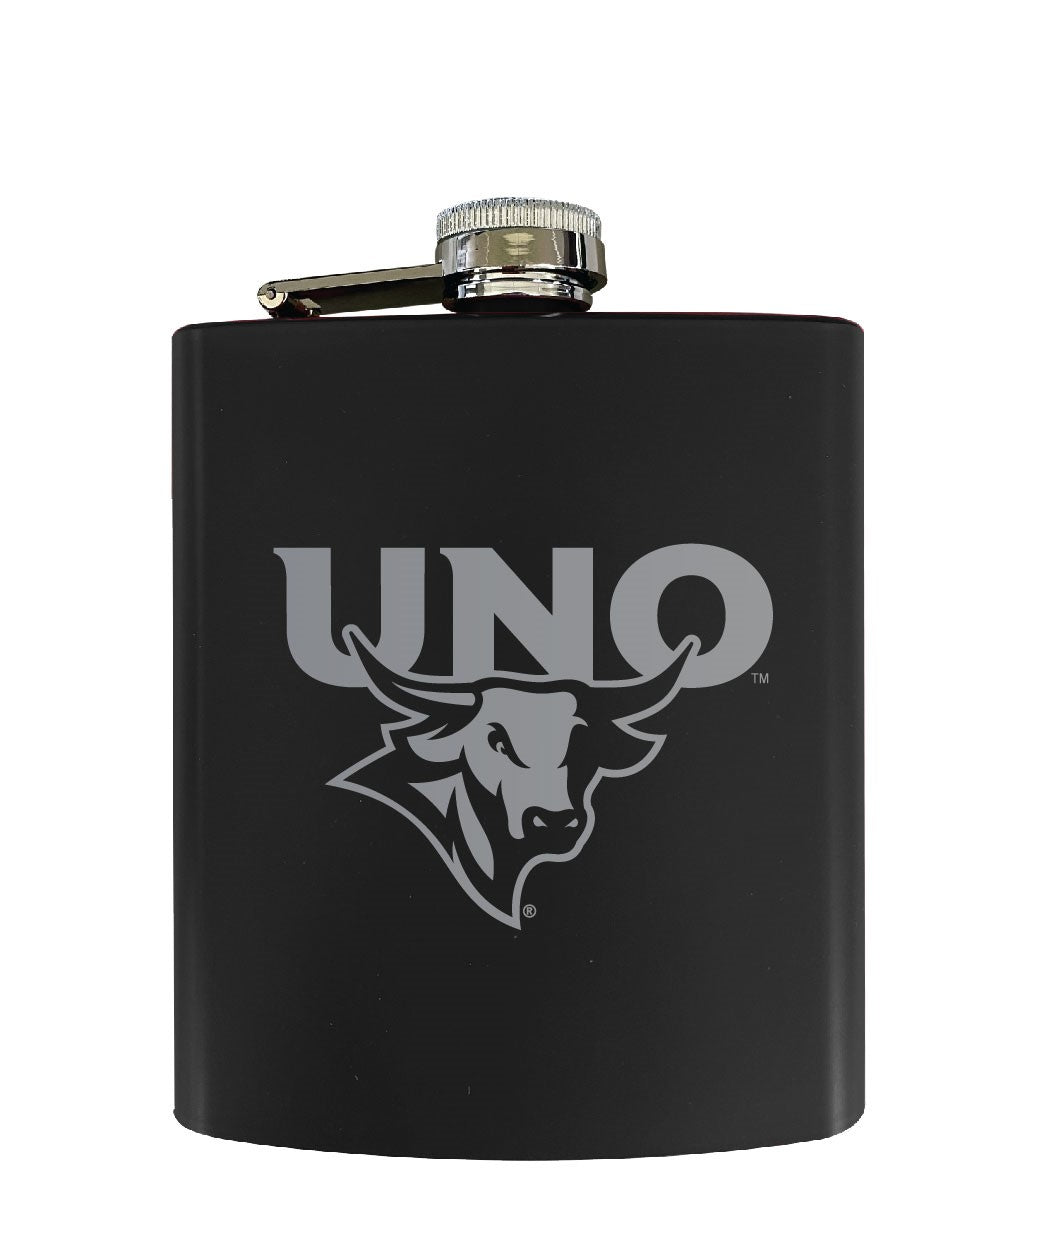 Nebraska at Omaha Stainless Steel Etched Flask - Choose Your Color